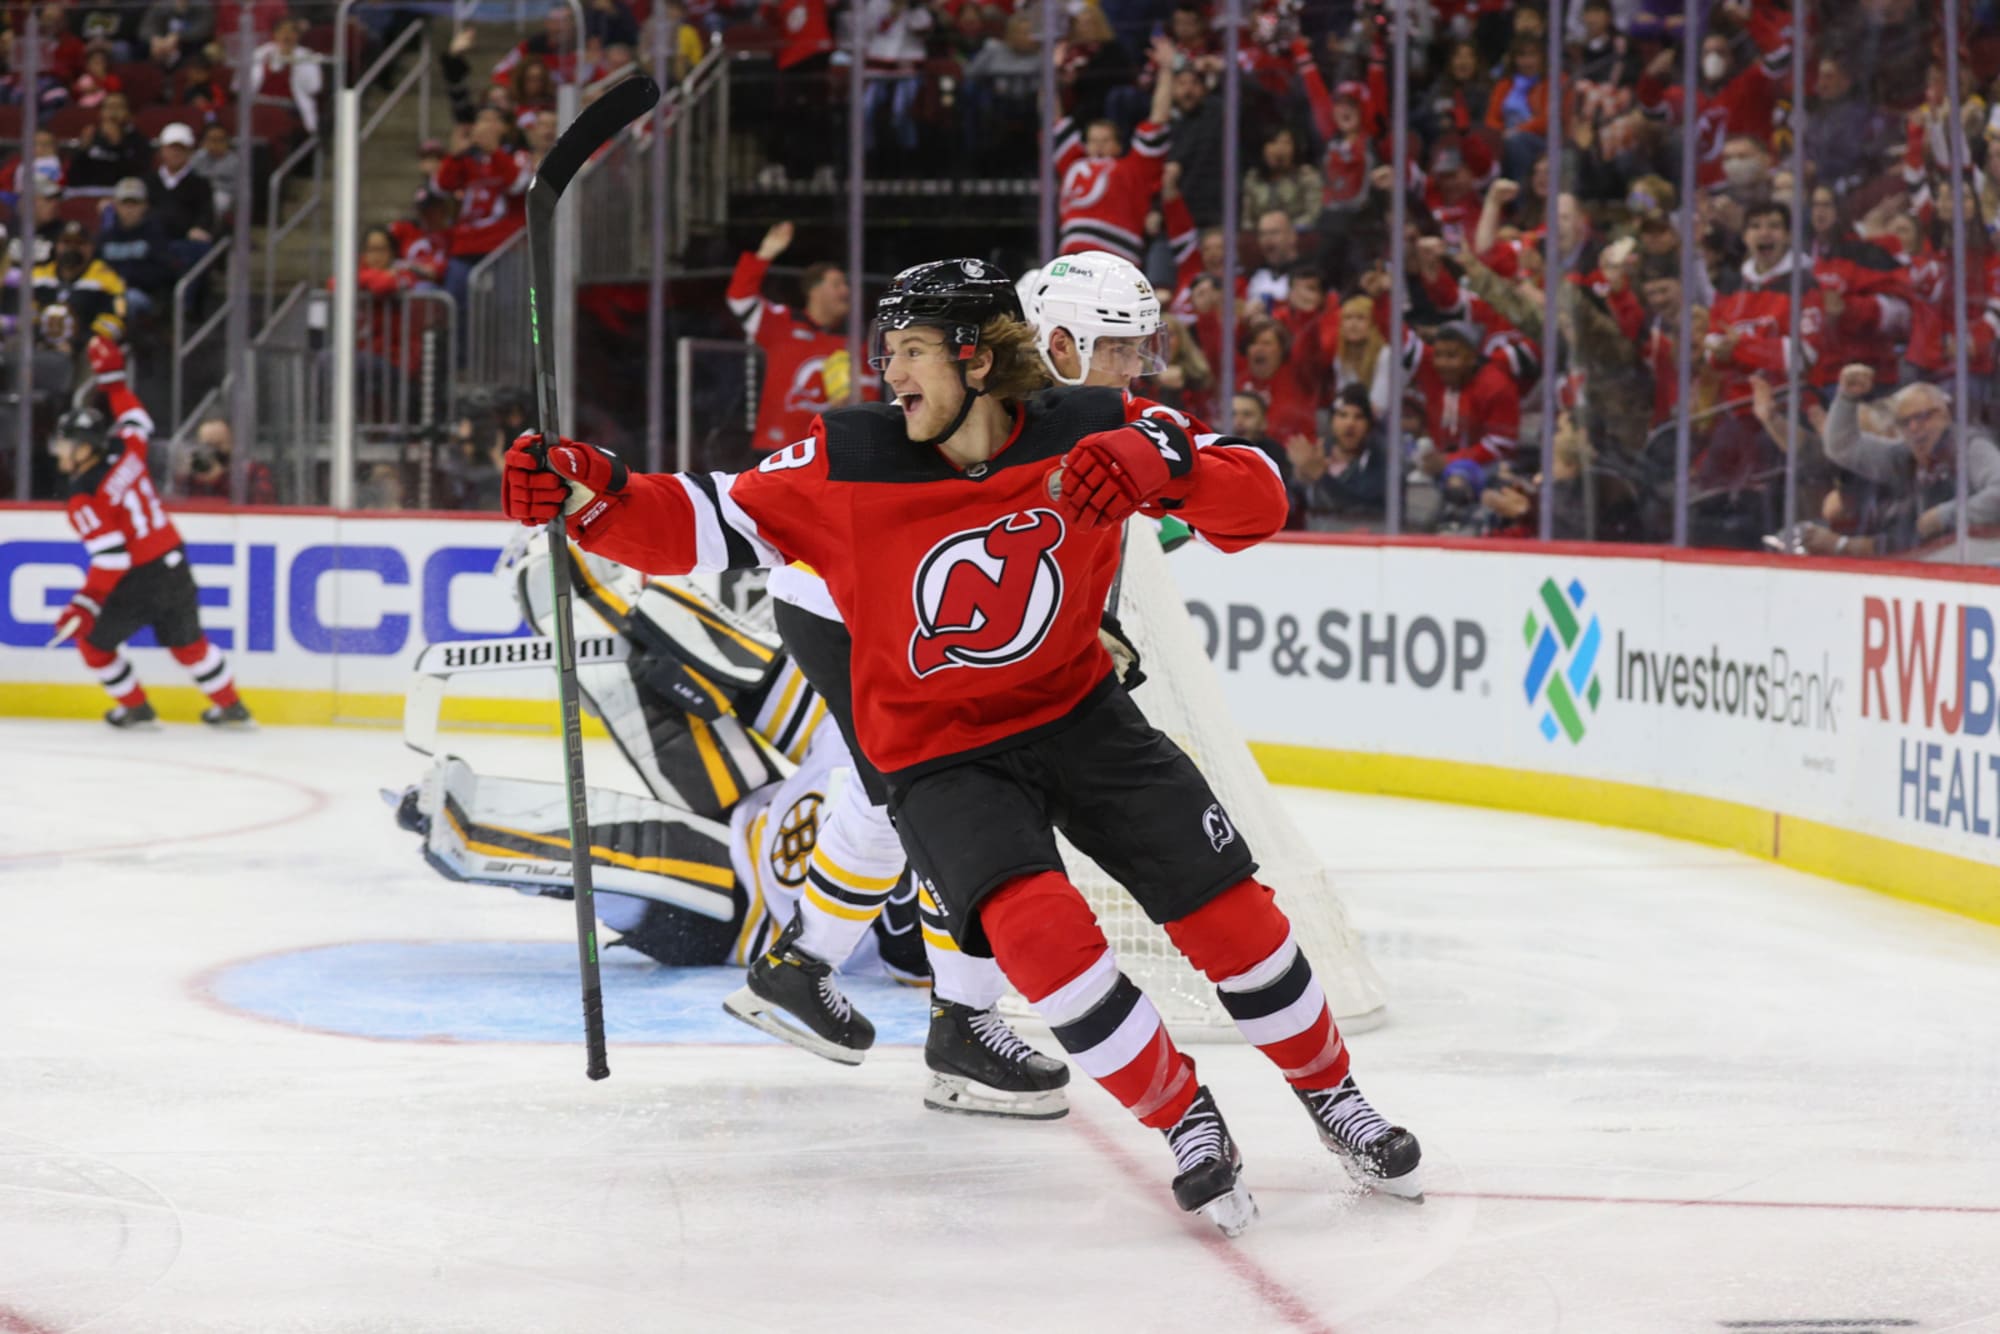 Dawson Mercer shines as his New Jersey Devils take a 3-2 series